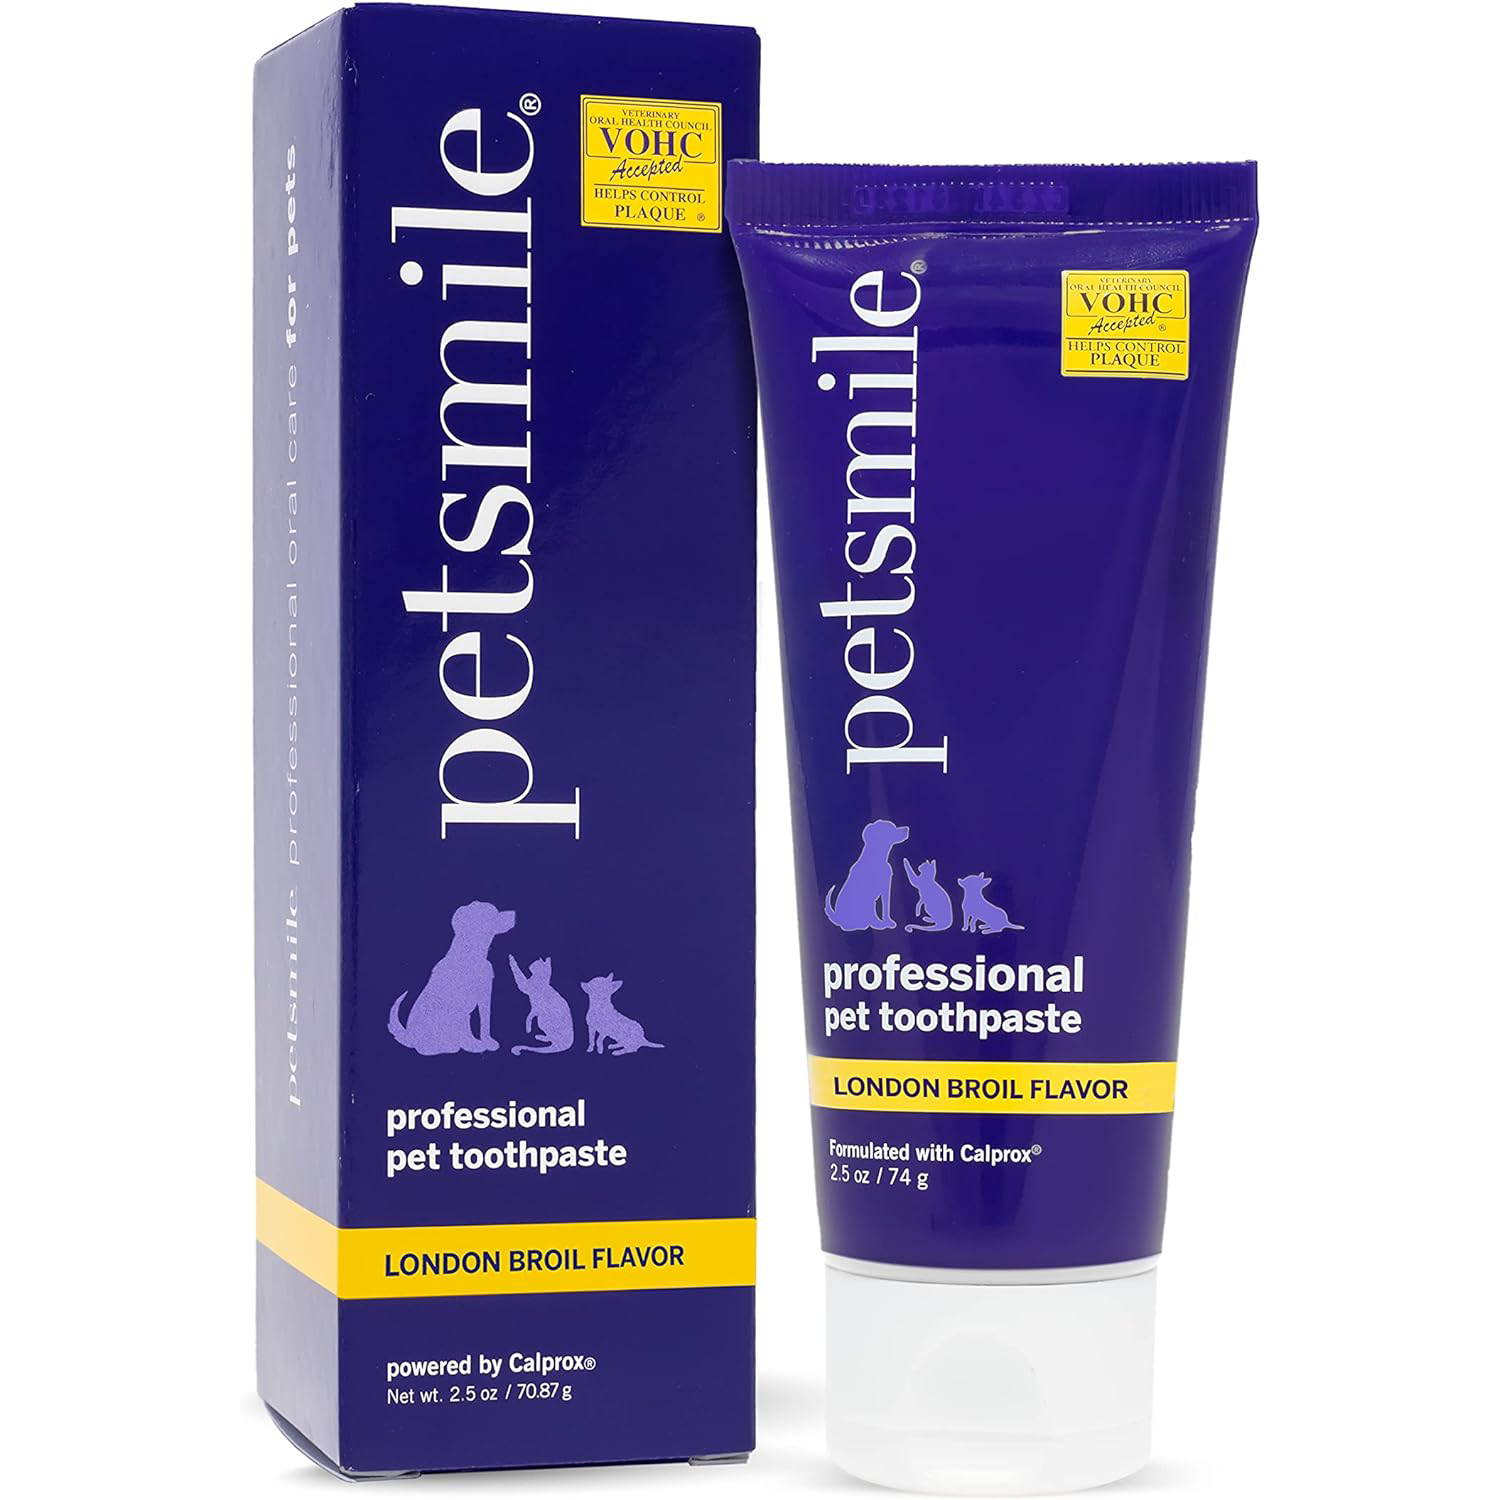 Petsmile Professional Pet Toothpaste - Cat & Dog Teeth Cleaning Supplies - Controls Plaque, Tartar, & Bad Breath - VOHC Accepted Toothpaste - Pet Dental Care Essentials (London Broil, 2.5 Oz) new